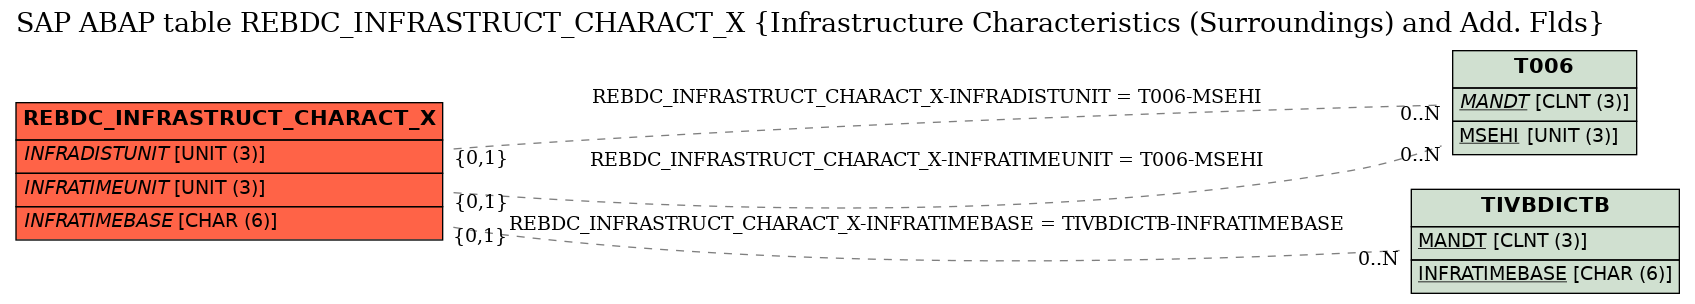 E-R Diagram for table REBDC_INFRASTRUCT_CHARACT_X (Infrastructure Characteristics (Surroundings) and Add. Flds)